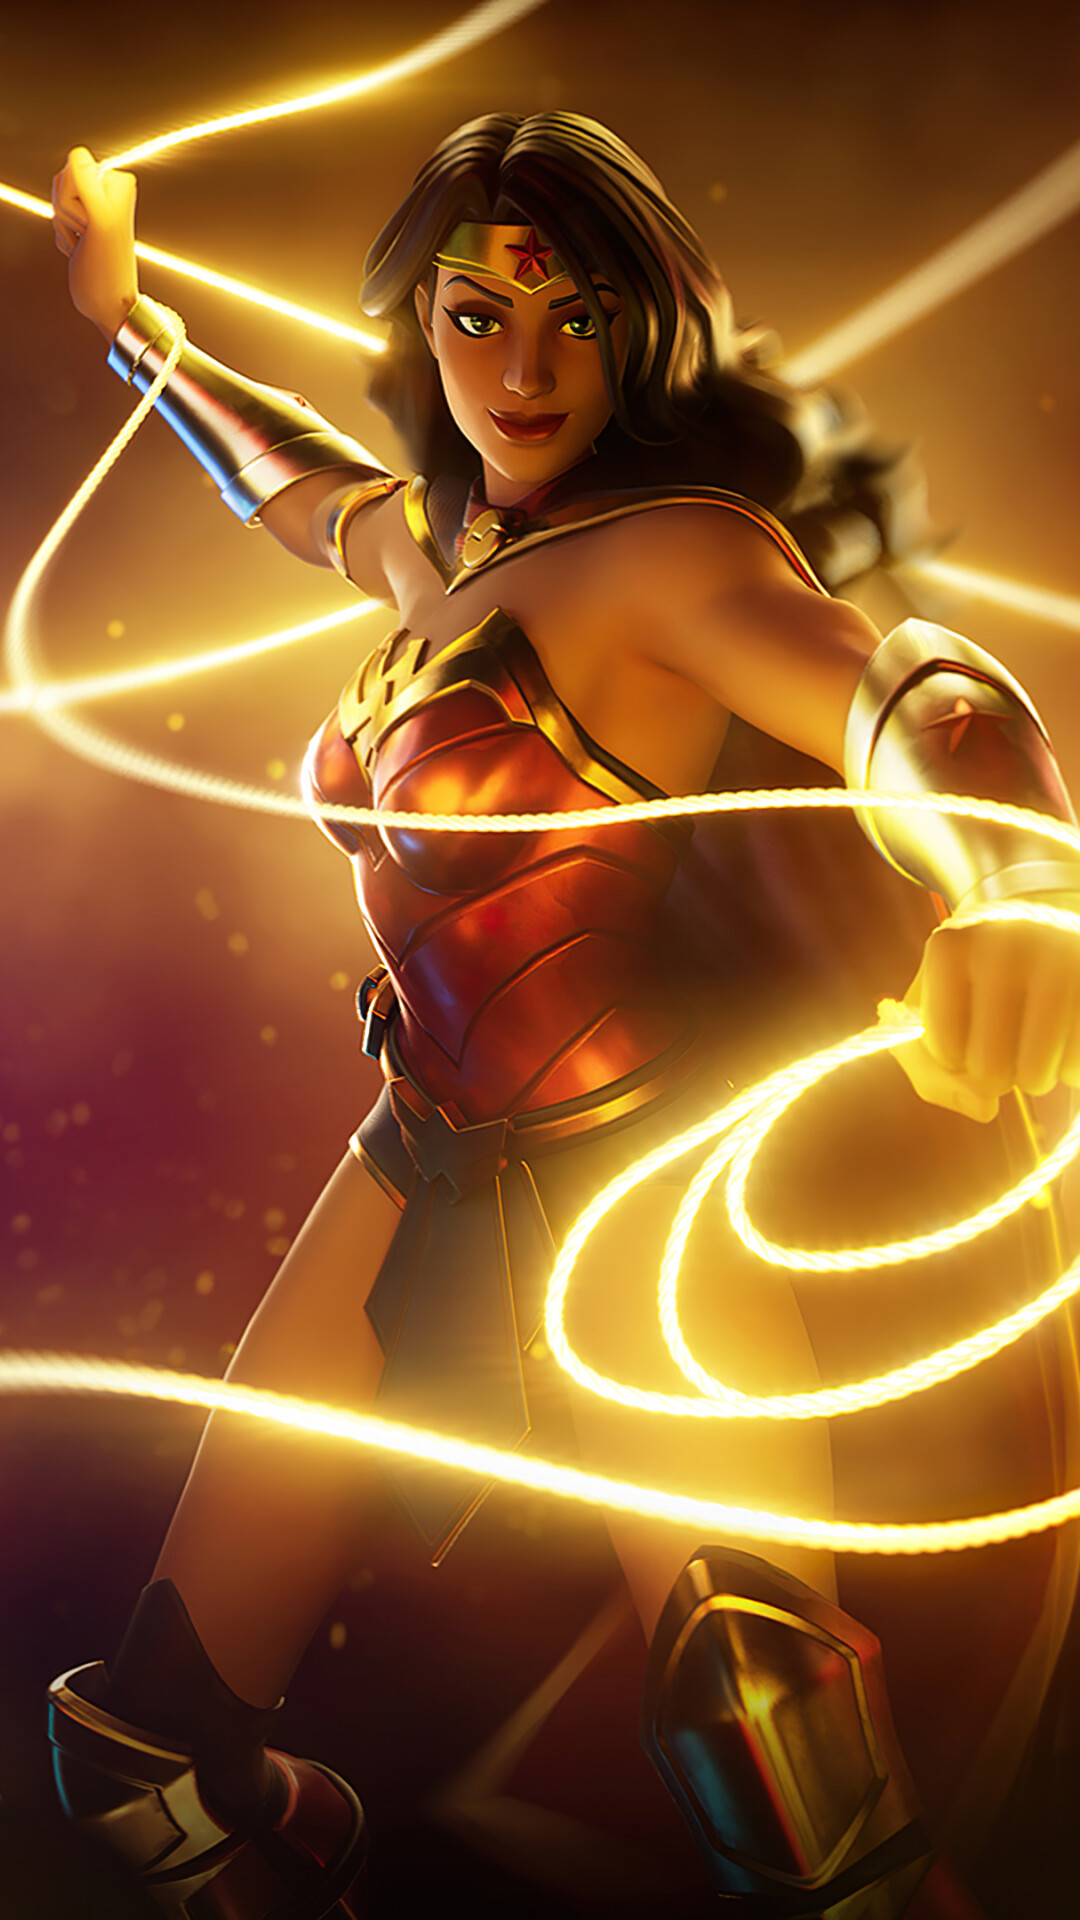 DC Heroes: Wonder Woman, a superhero created by William Moulton Marston and Harry G. Peter. 1080x1920 Full HD Wallpaper.